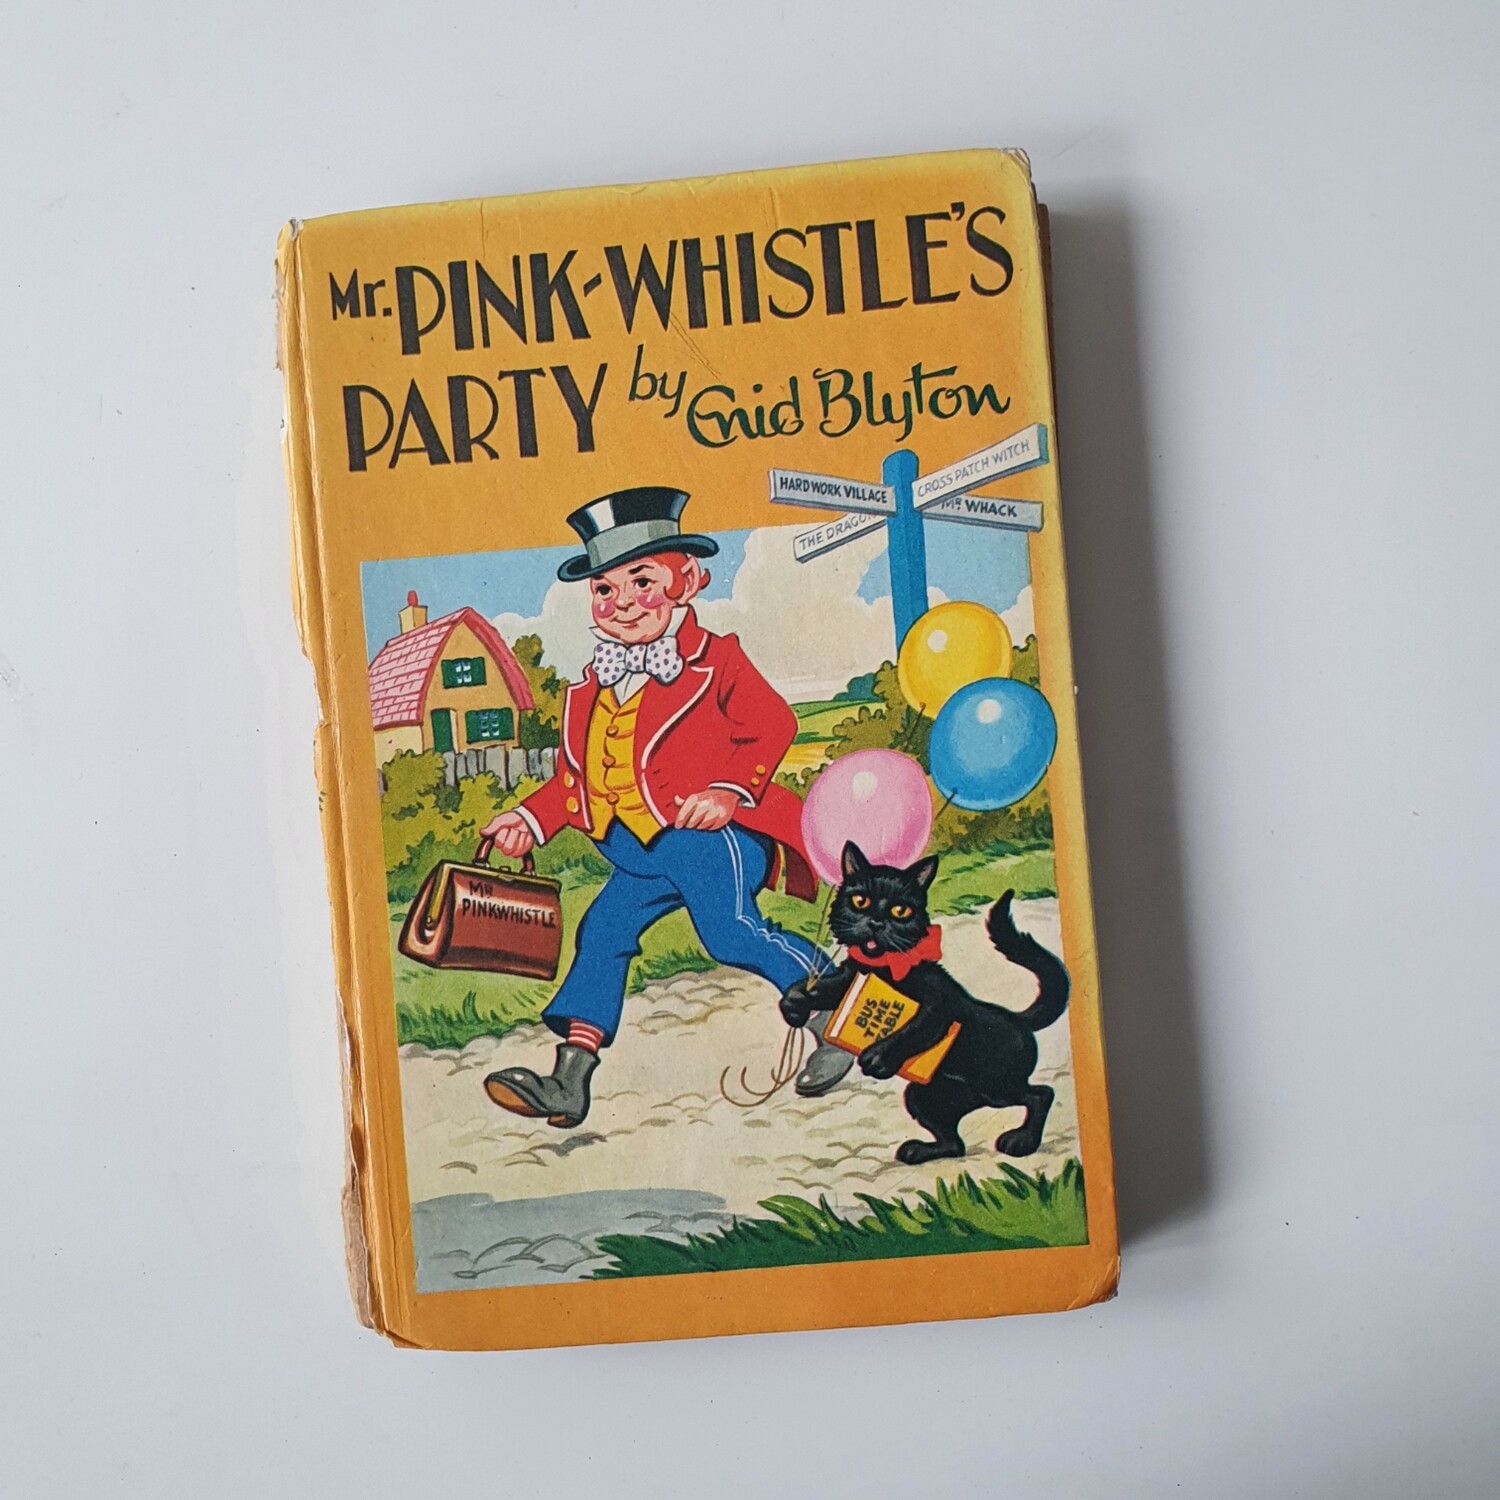 Mr Pink Whistle's Party by Enid Blyton - choose from a selection